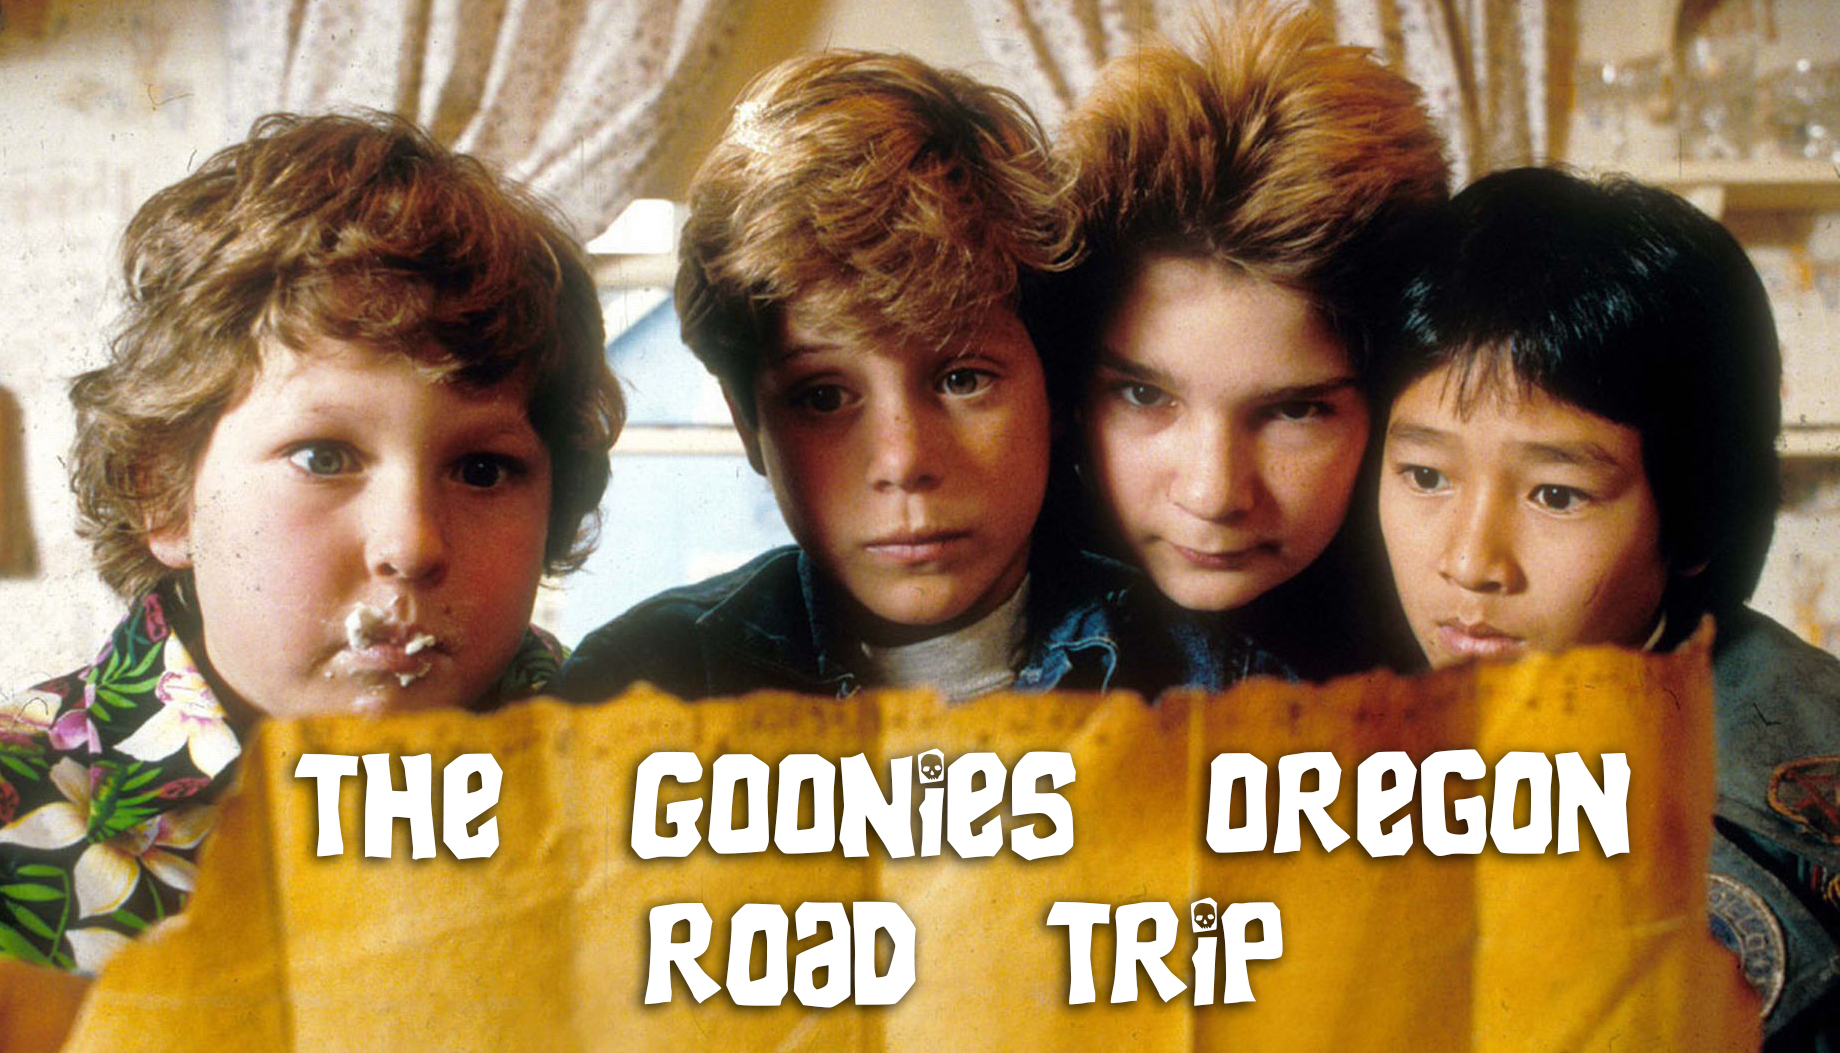 Hey You Guys Heres The Goonies Road Trip In Oregon That Oregon Life